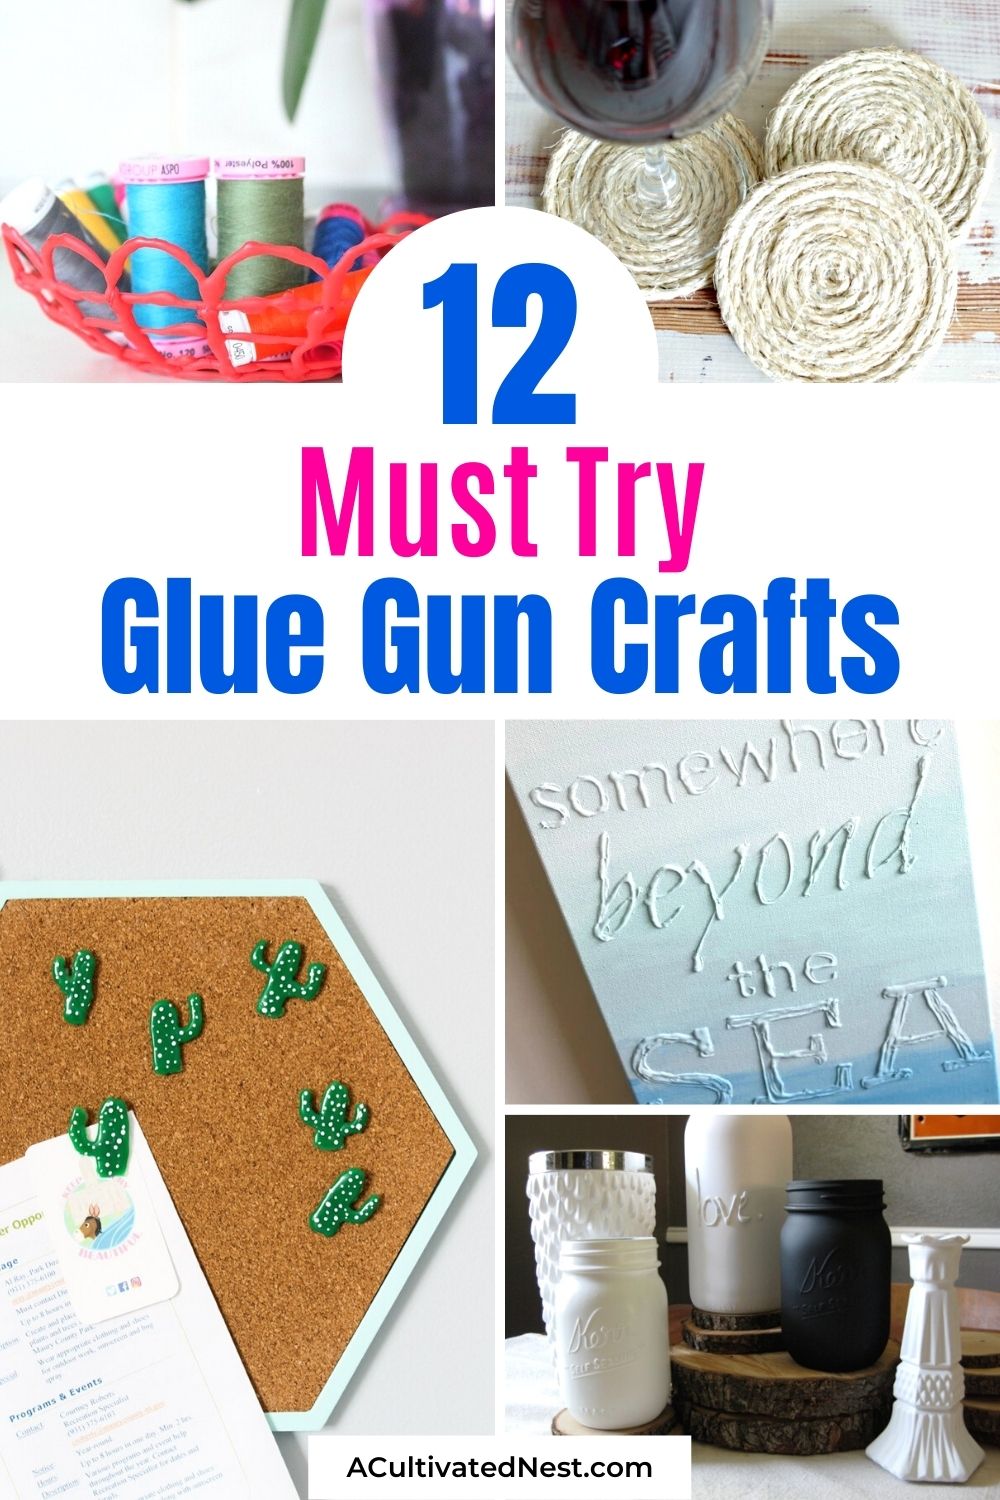 12 Must Try Glue Gun Crafts- A glue gun is an critical crafting tool, and the melted glue from one can be used to make a lot of fun and easy glue gun crafts! | crafts for teens, #crafting #teenCrafts #diy #easyCrafts #ACultivatedNest